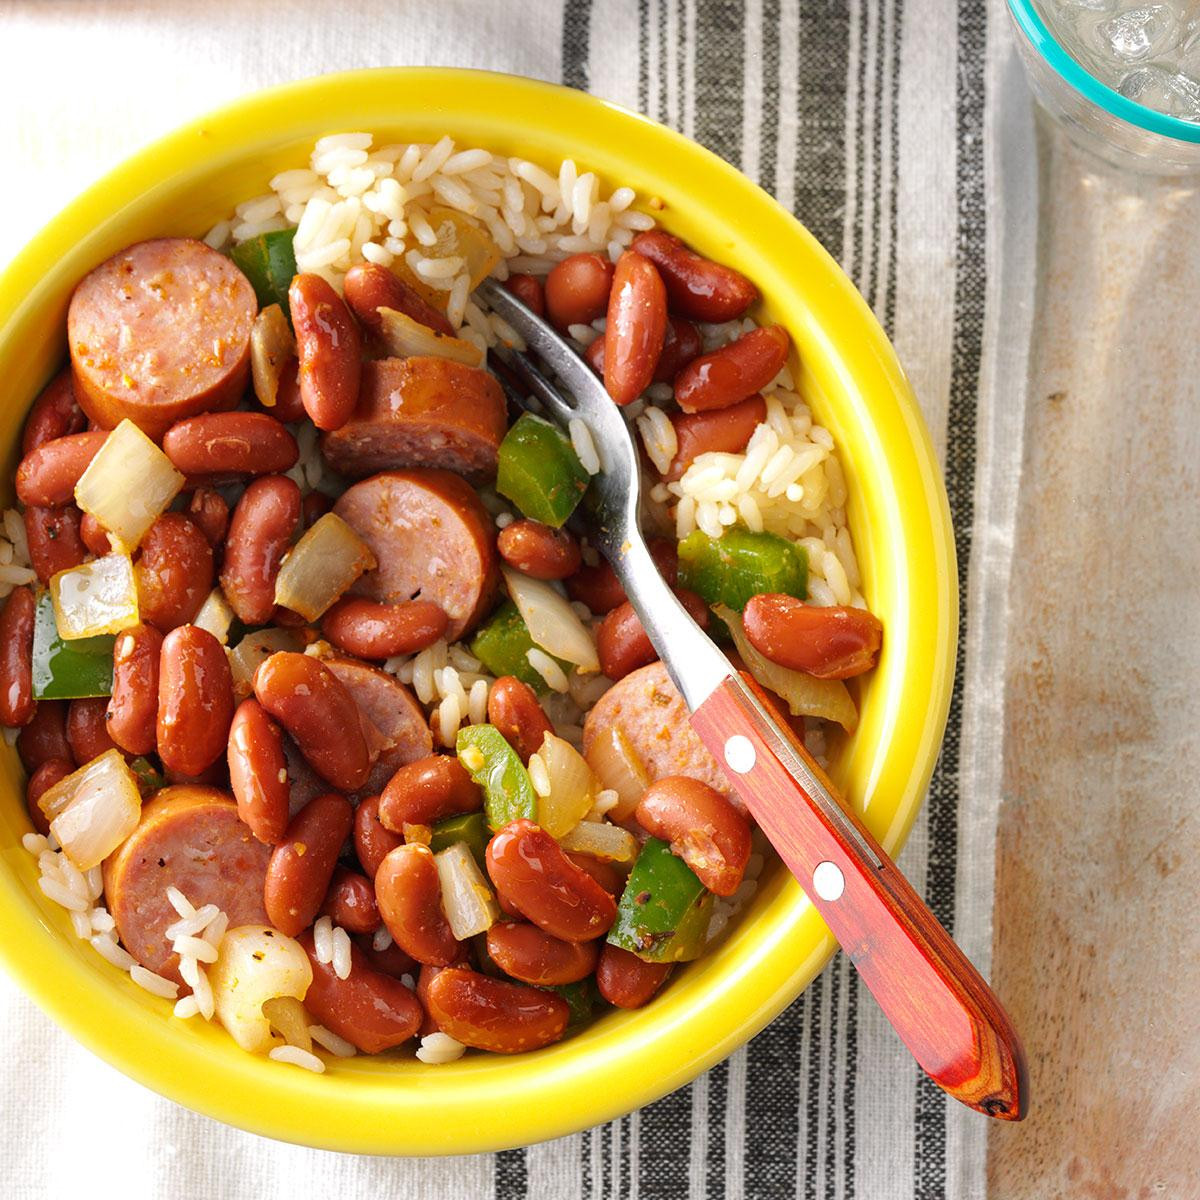 Healthy Breakfast New Orleans
 Red Beans and Sausage Recipe